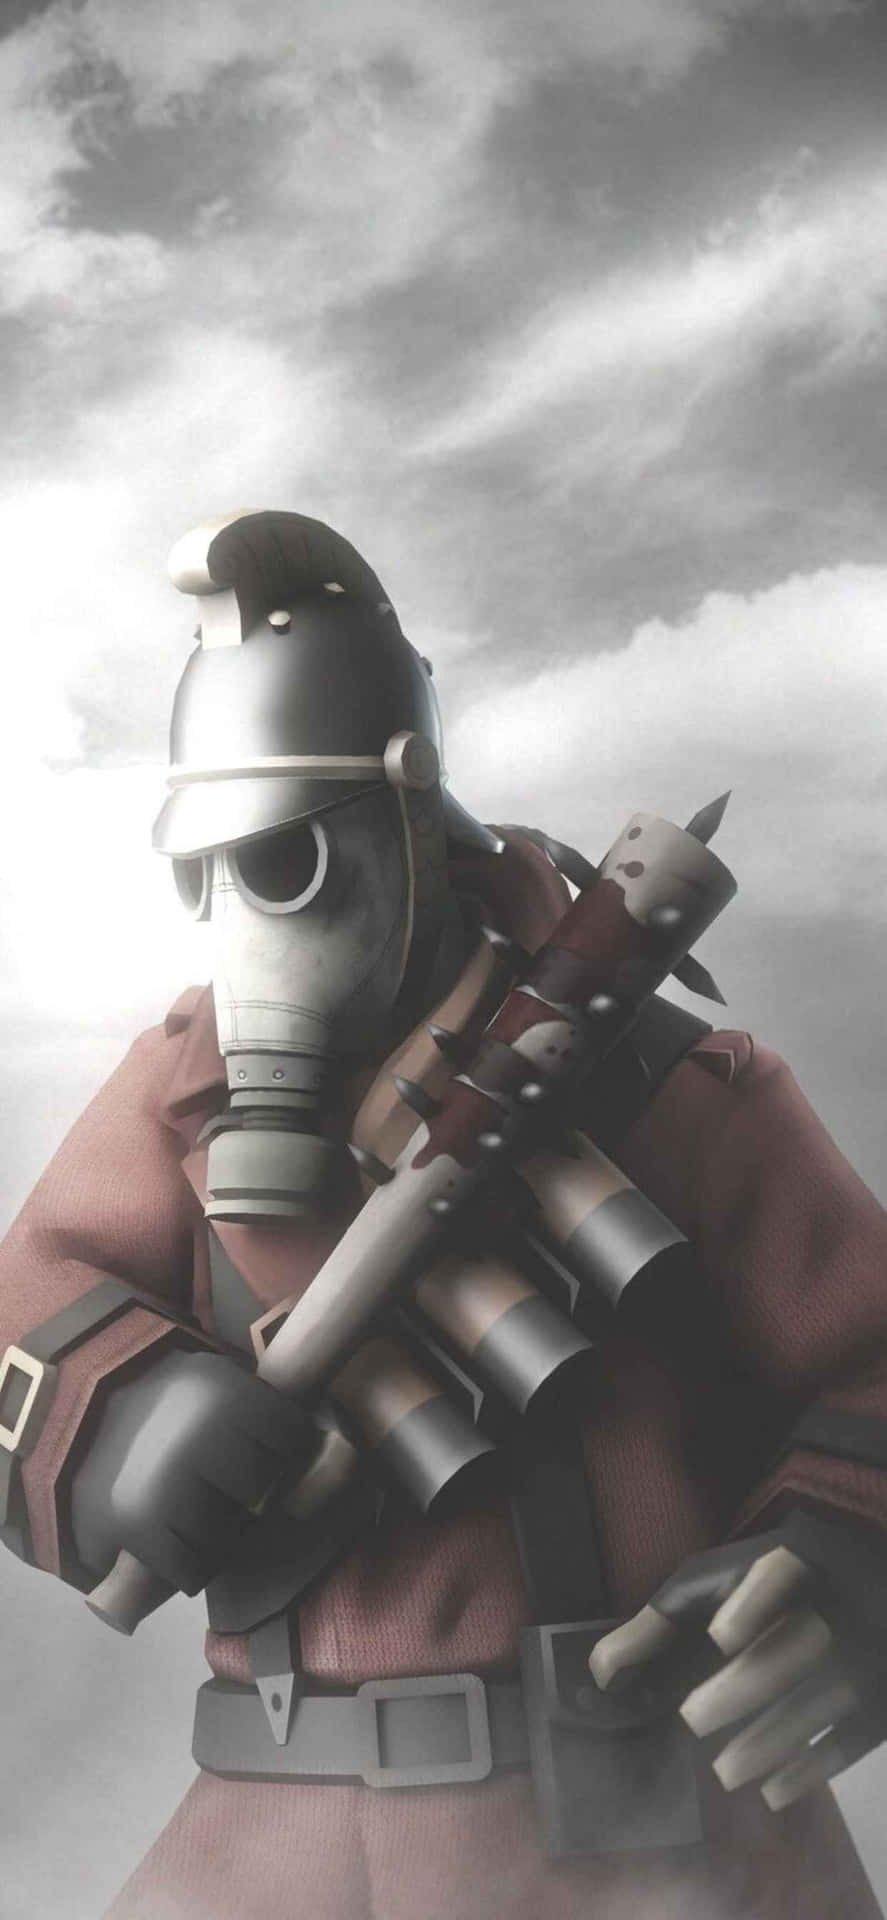 Pyro Grayscale Iphone Xs Max Team Fortress 2 Background